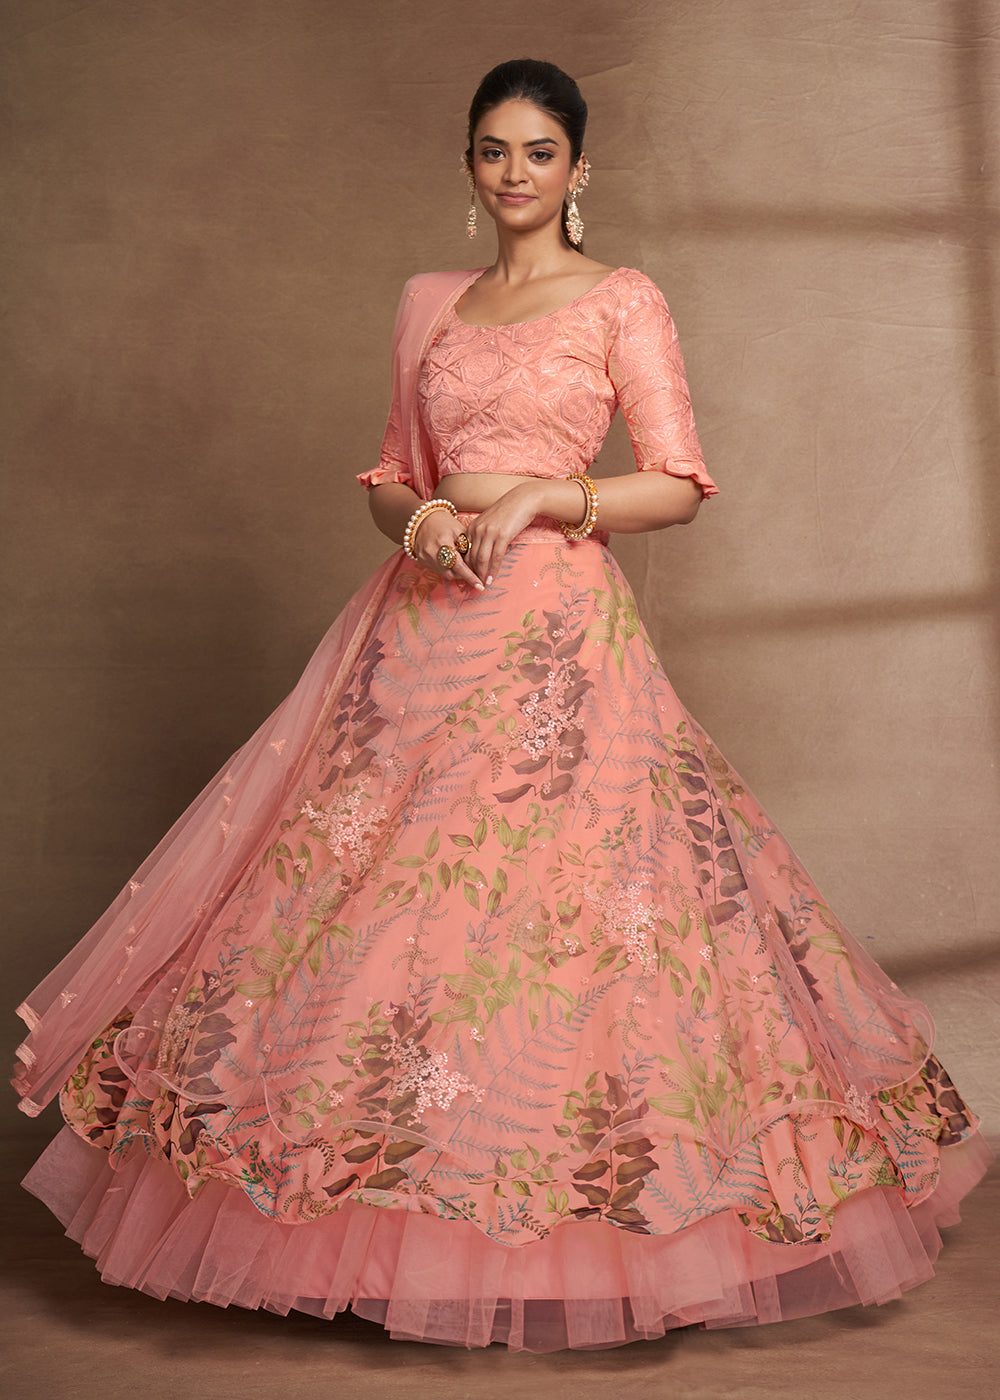 Buy Now Lovely Peach Floral Digital Printed & Embroidered Lehenga Choli Online in USA, UK, Canada & Worldwide at Empress Clothing. 